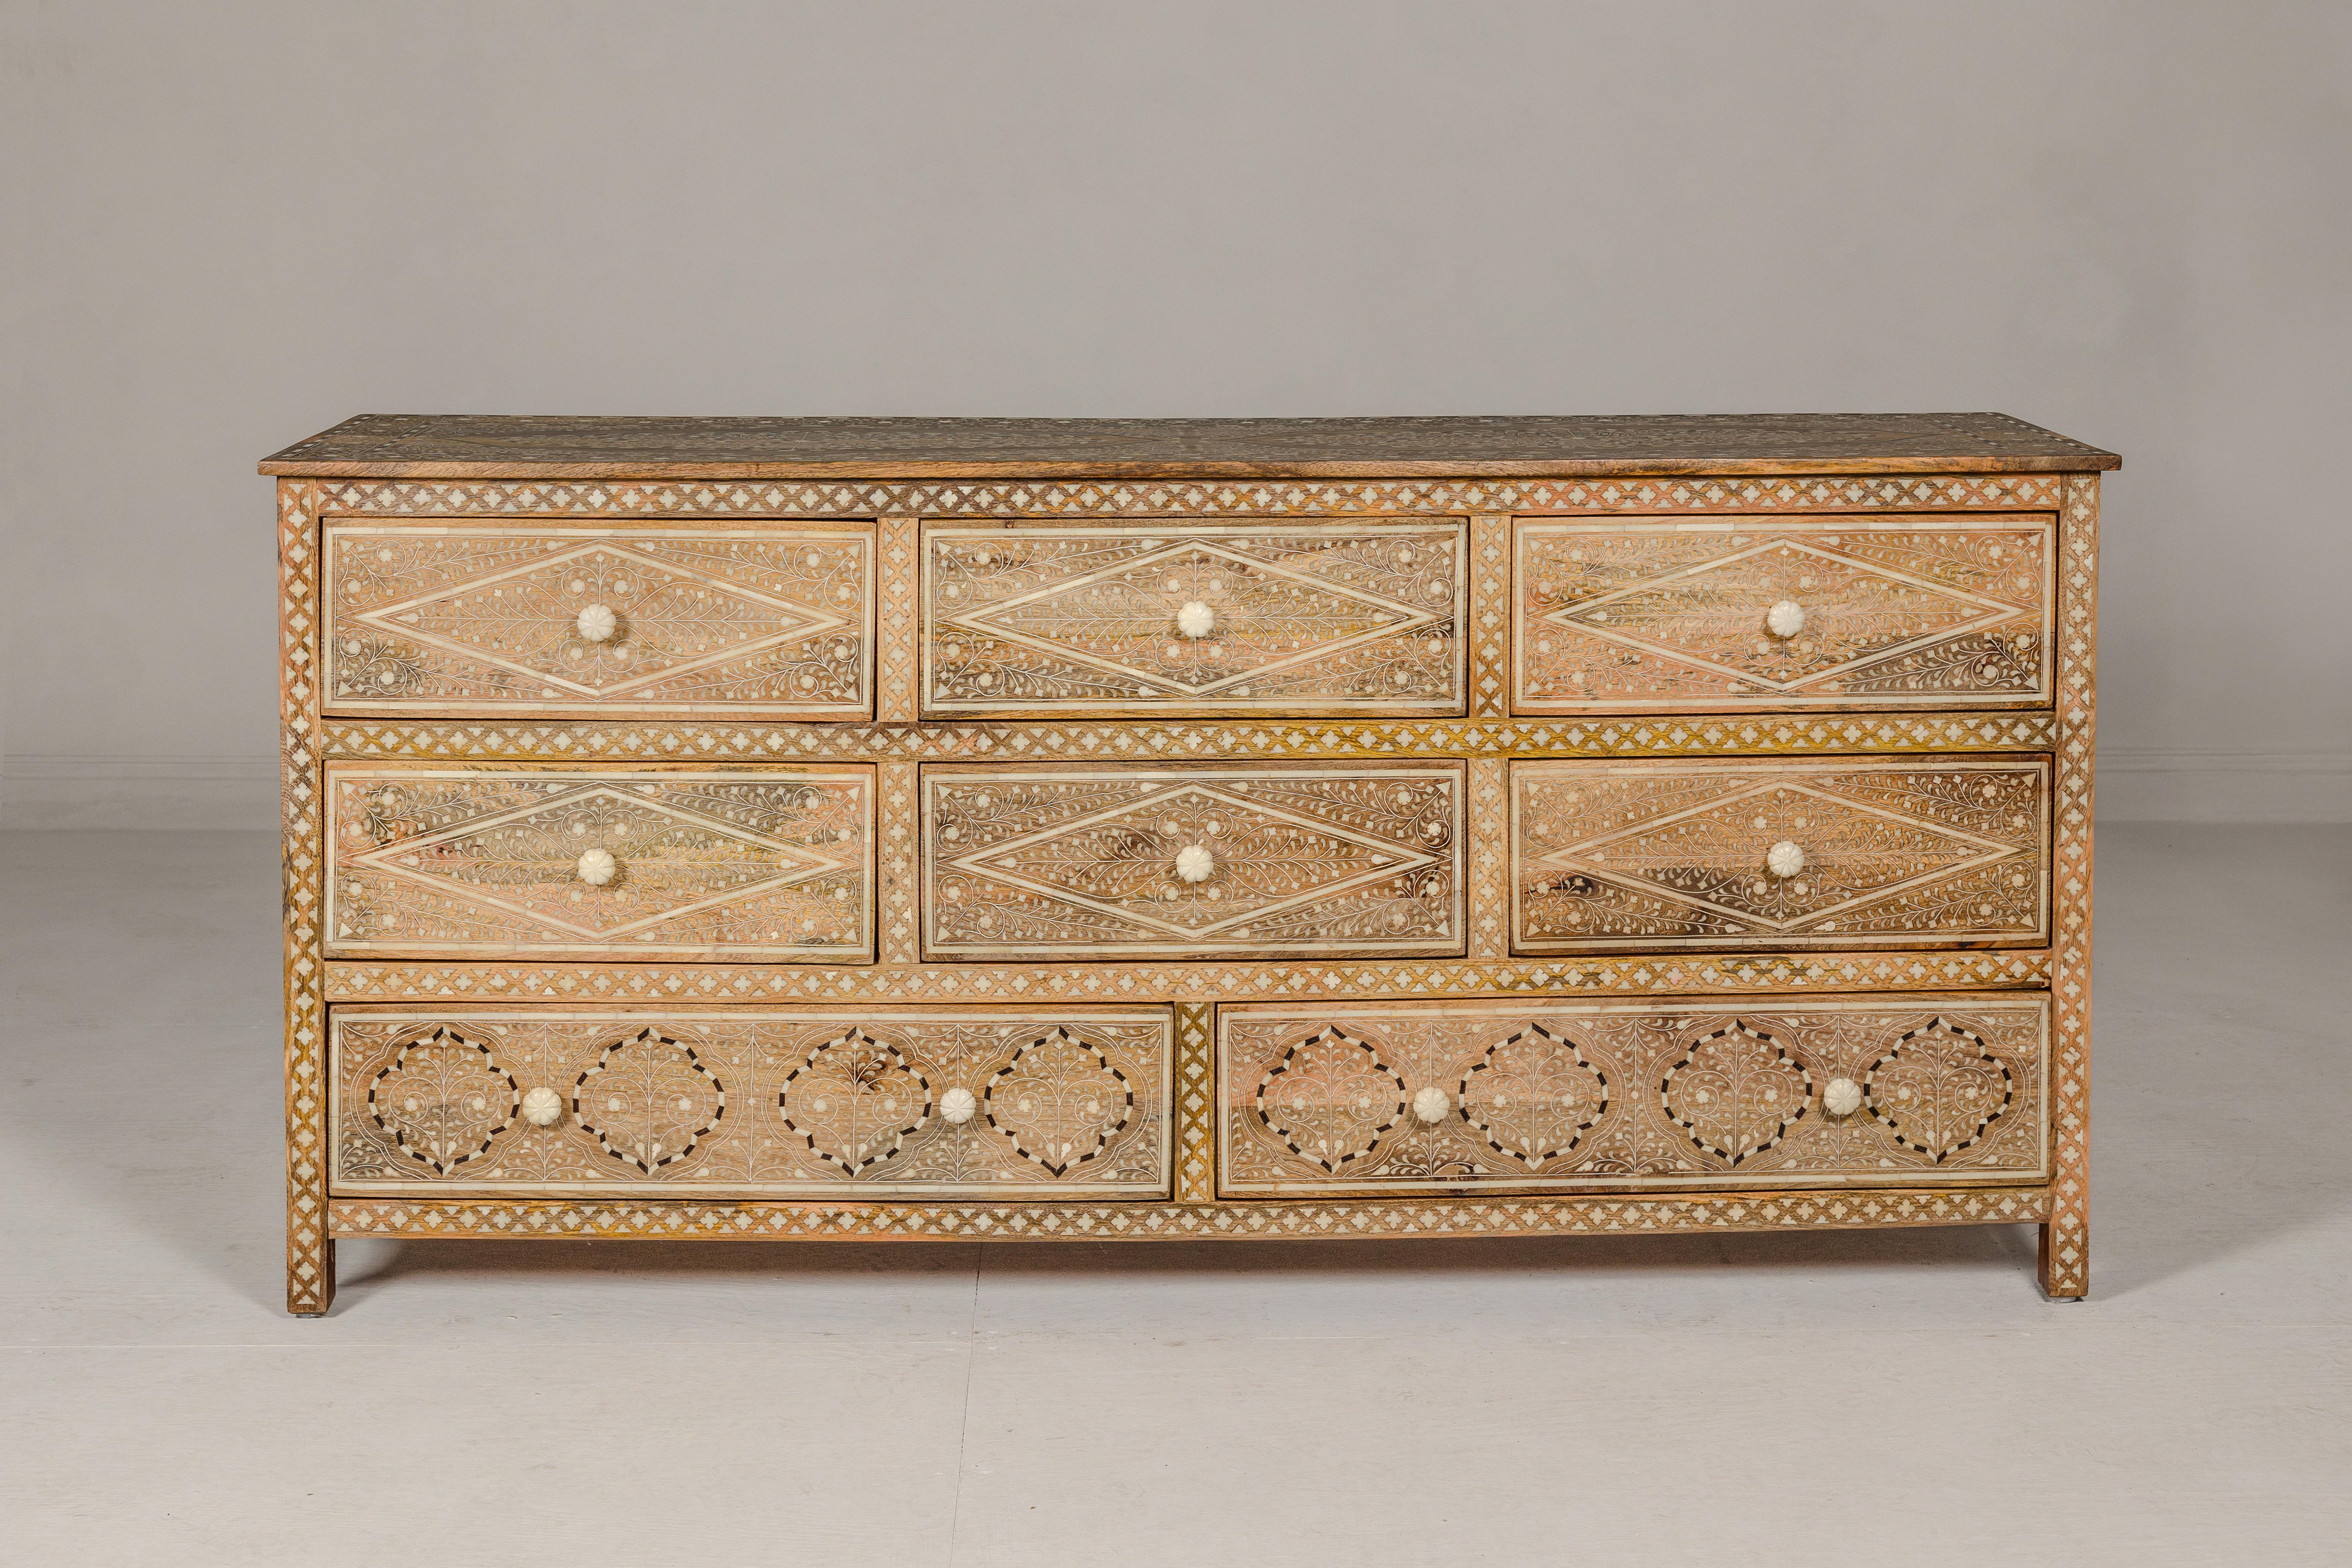 An Anglo-Indian style mango wood dresser with eight drawers, bone inlaid décor showcasing scrolling foliage and bone hardware. This exquisite Anglo-Indian style mango wood dresser is a testament to intricate craftsmanship and elegant design.